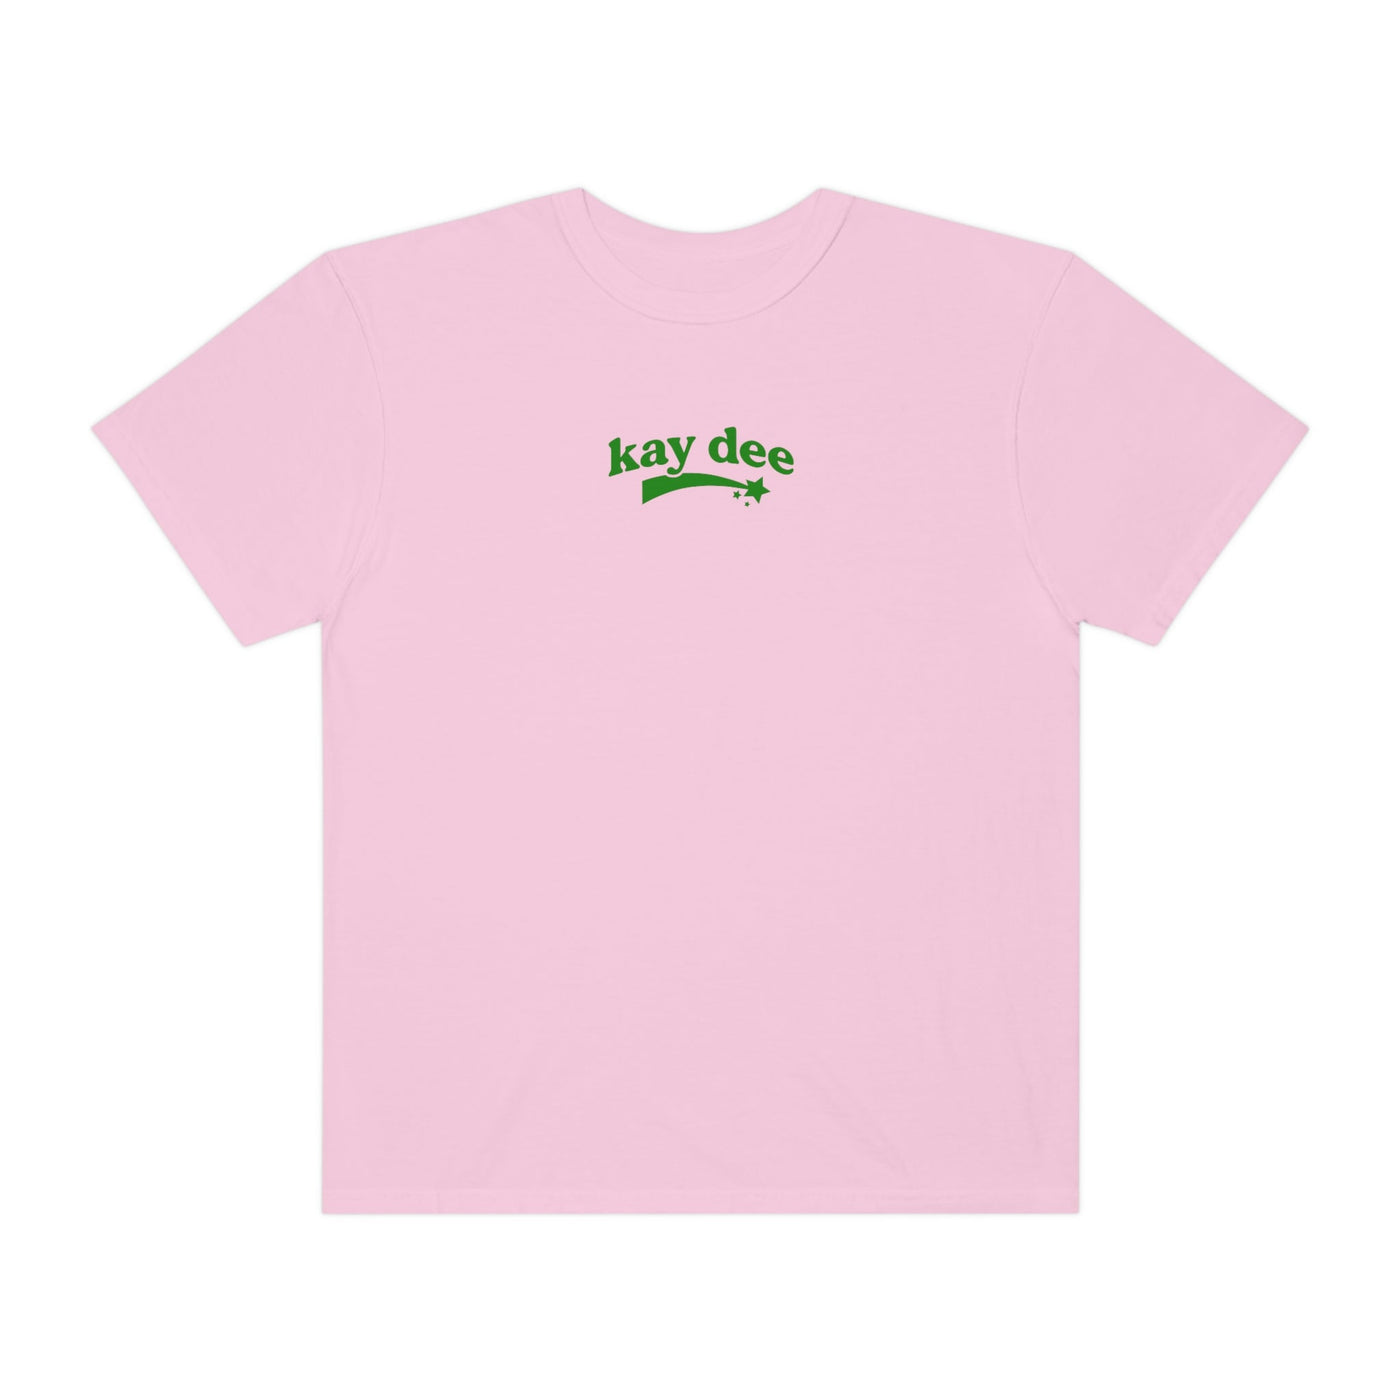 Kappa Delta Planet T-shirt | Be Kind to the Planet Trendy Sorority shirt